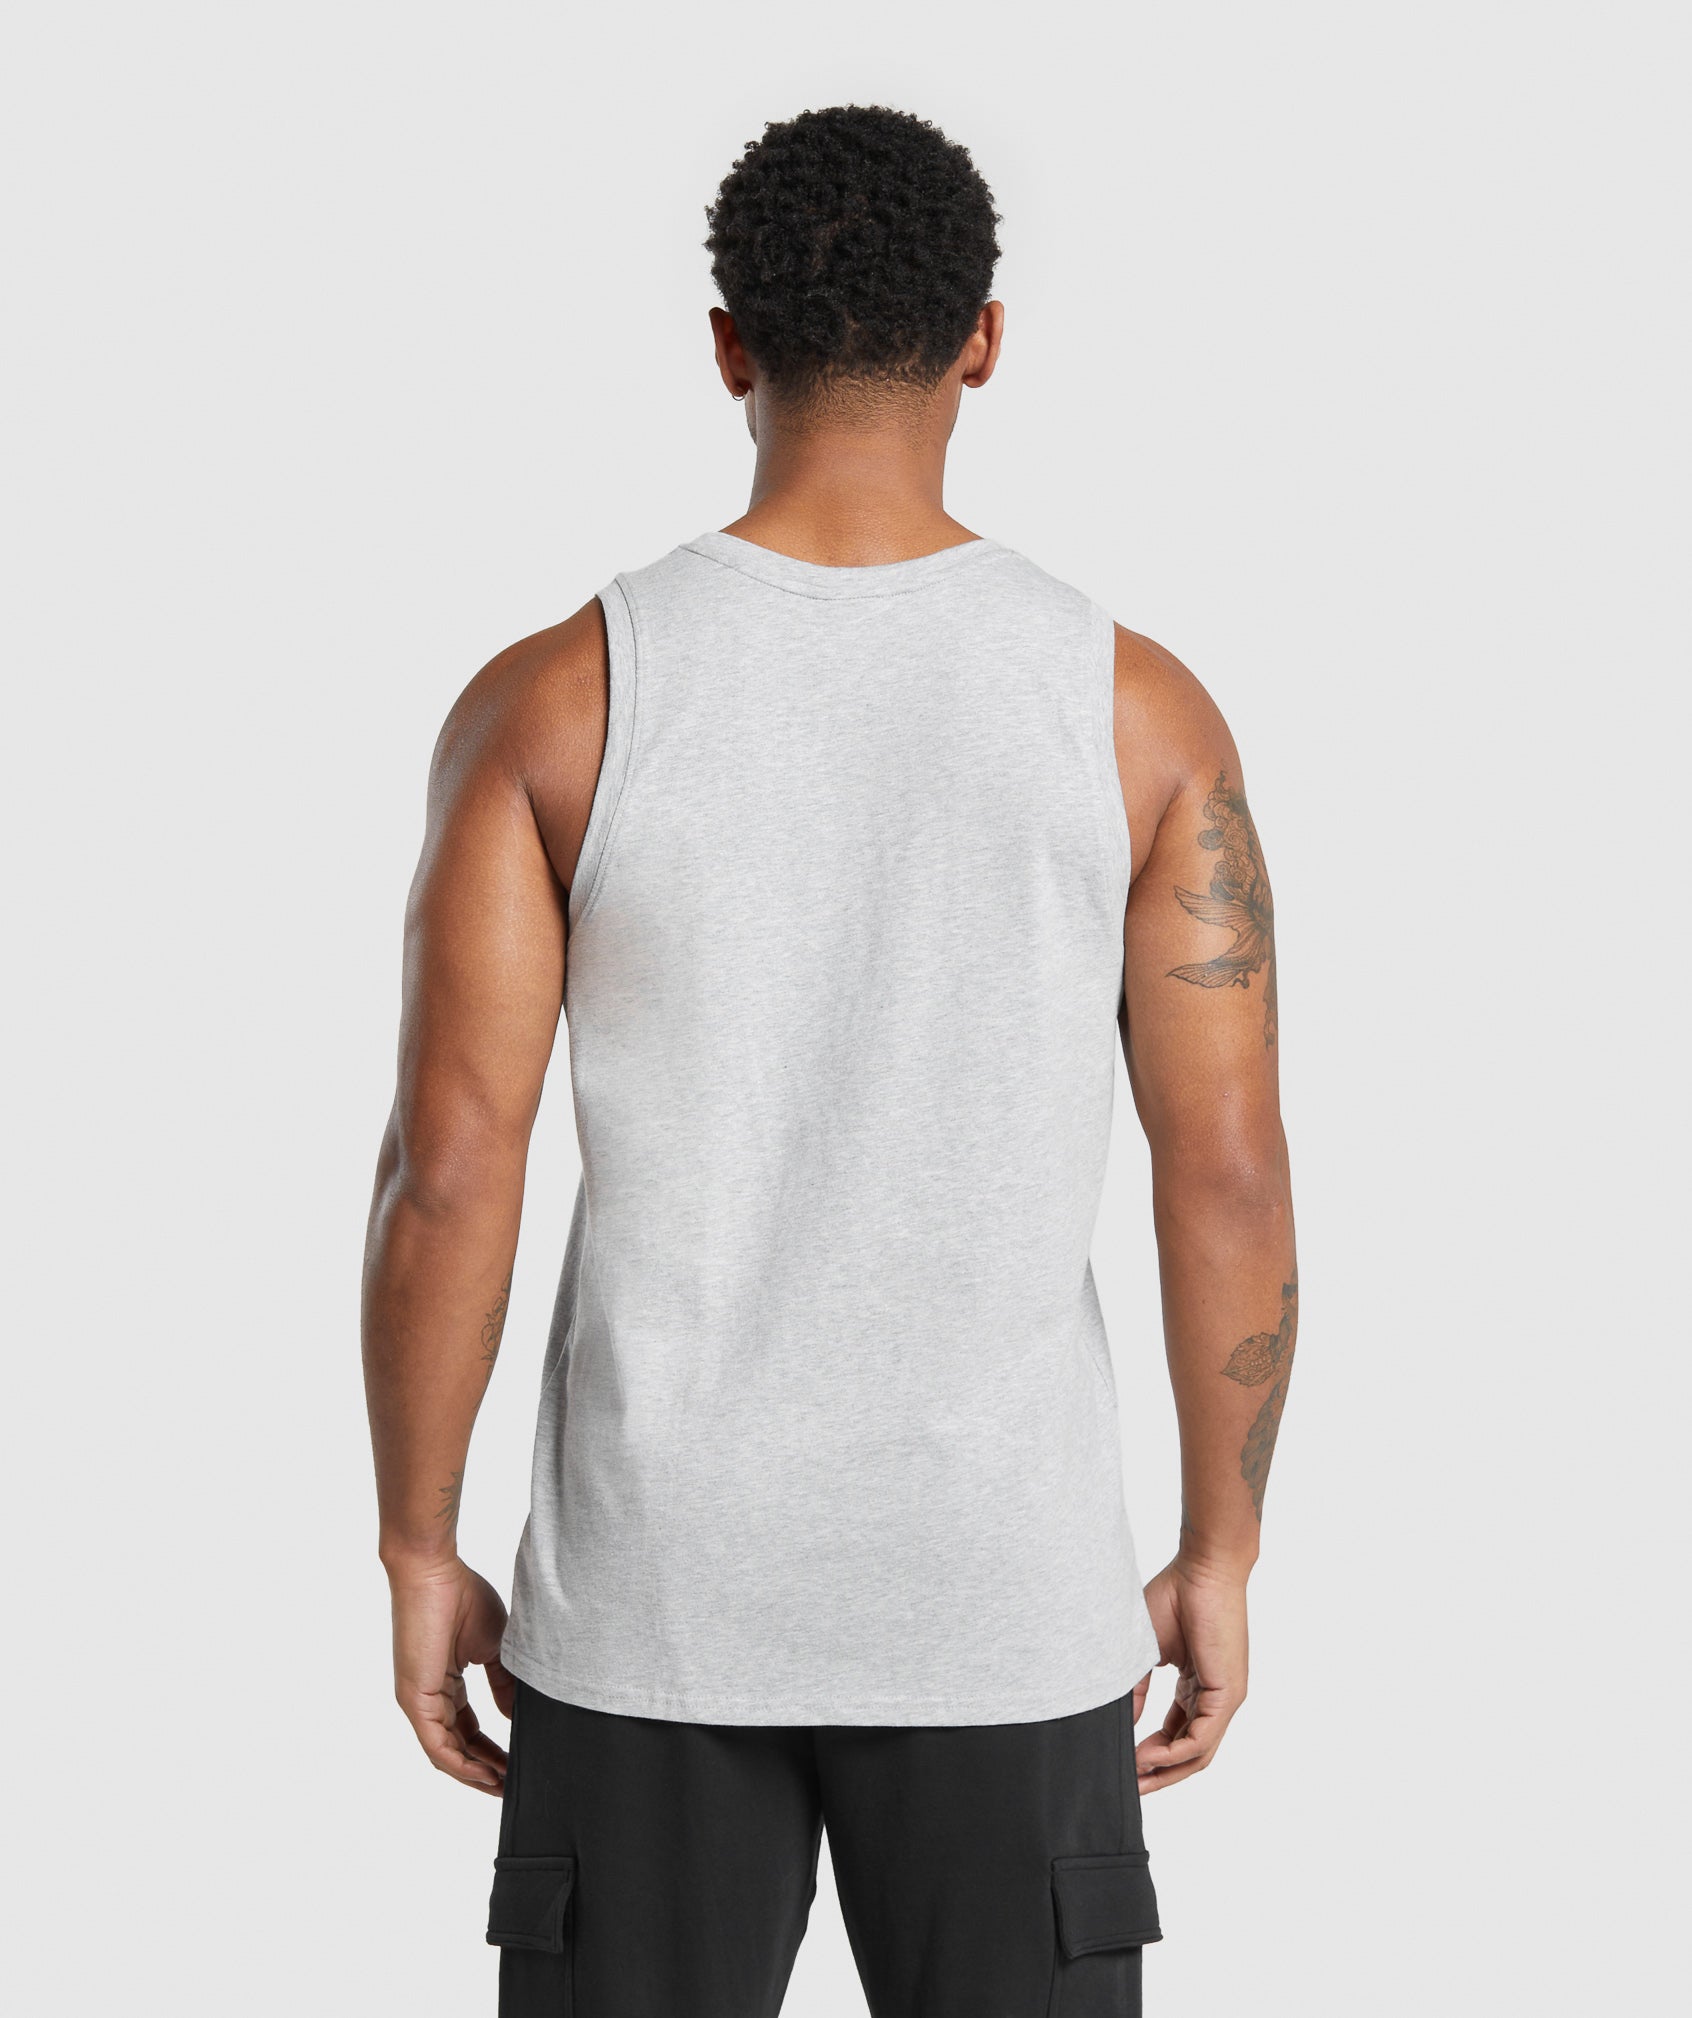 Crest Tank in Light Grey Core Marl - view 3